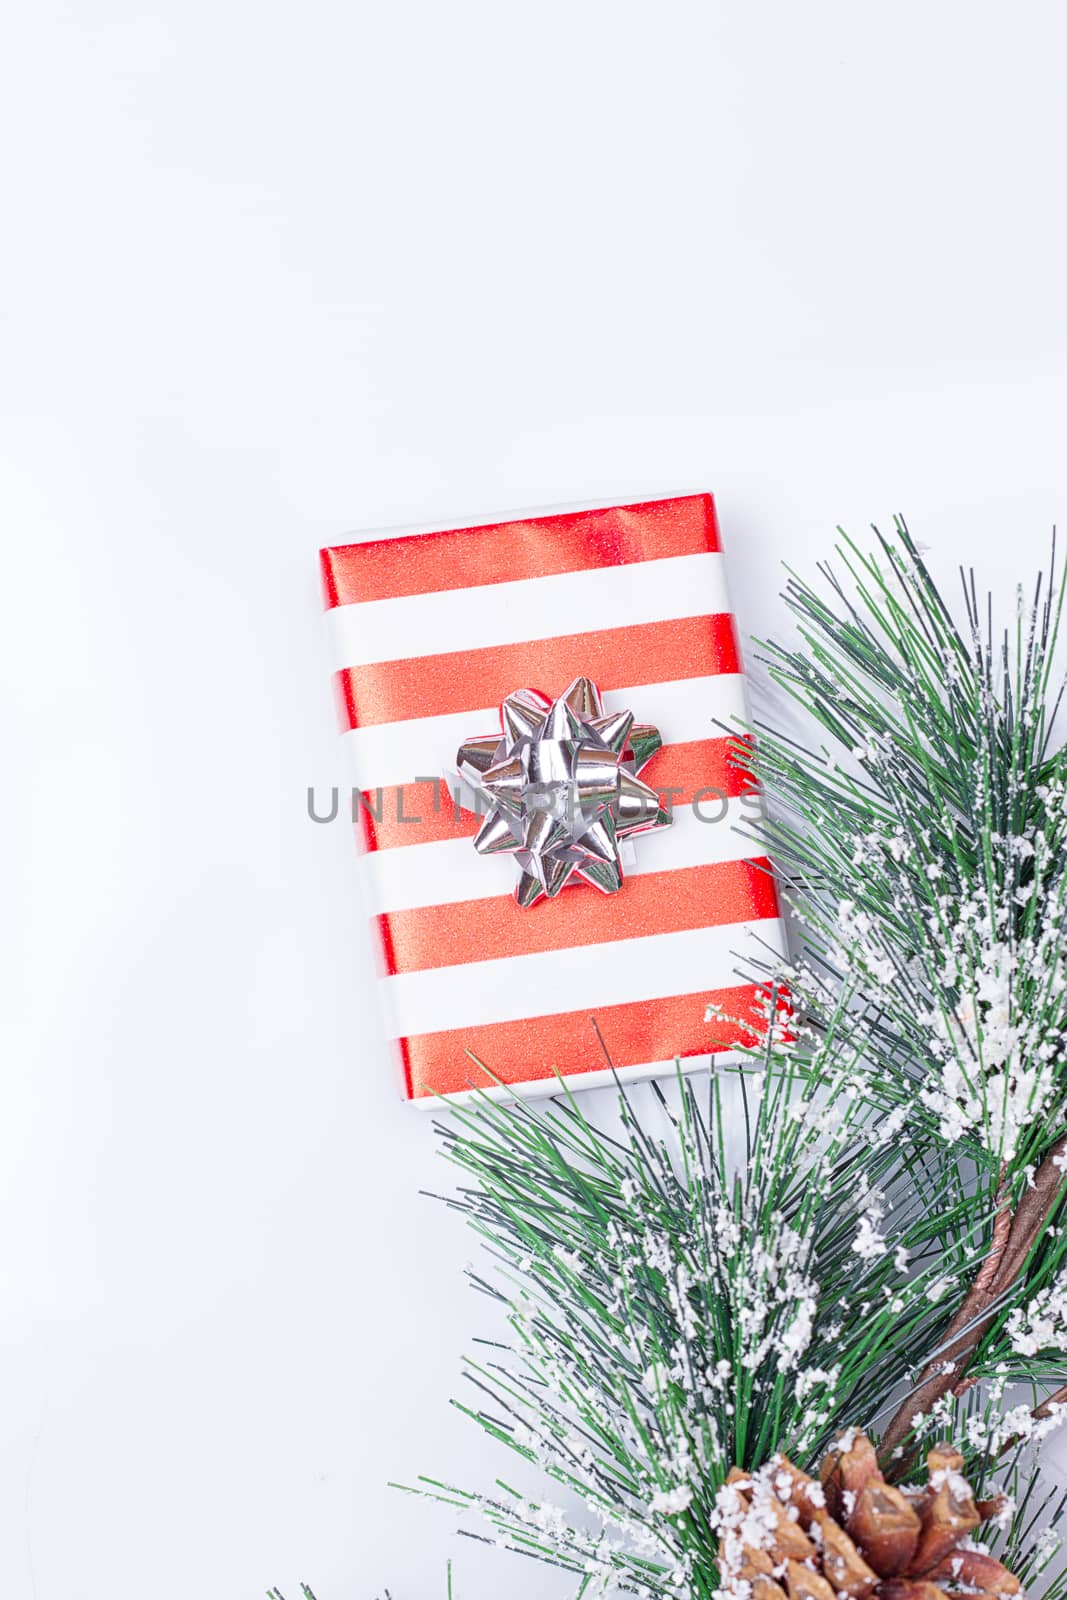 Pine Cones and Gifts on the white background